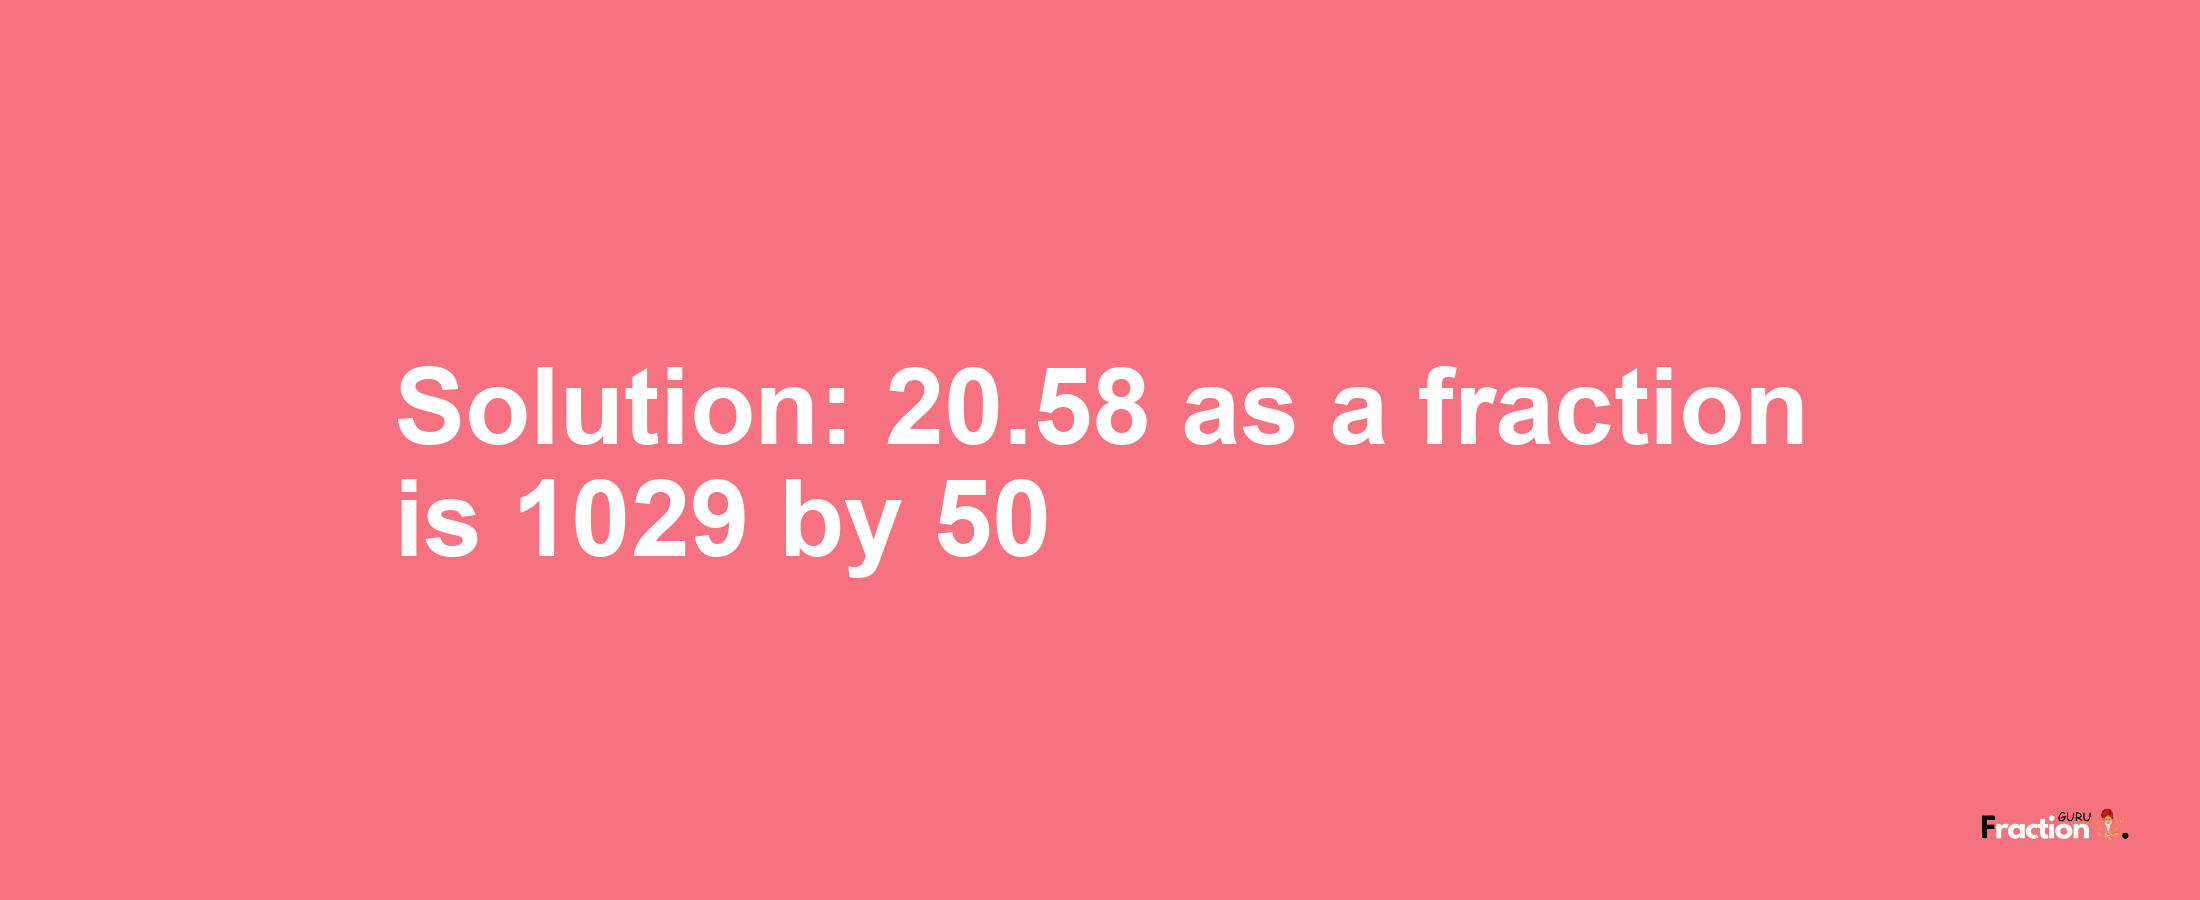 Solution:20.58 as a fraction is 1029/50